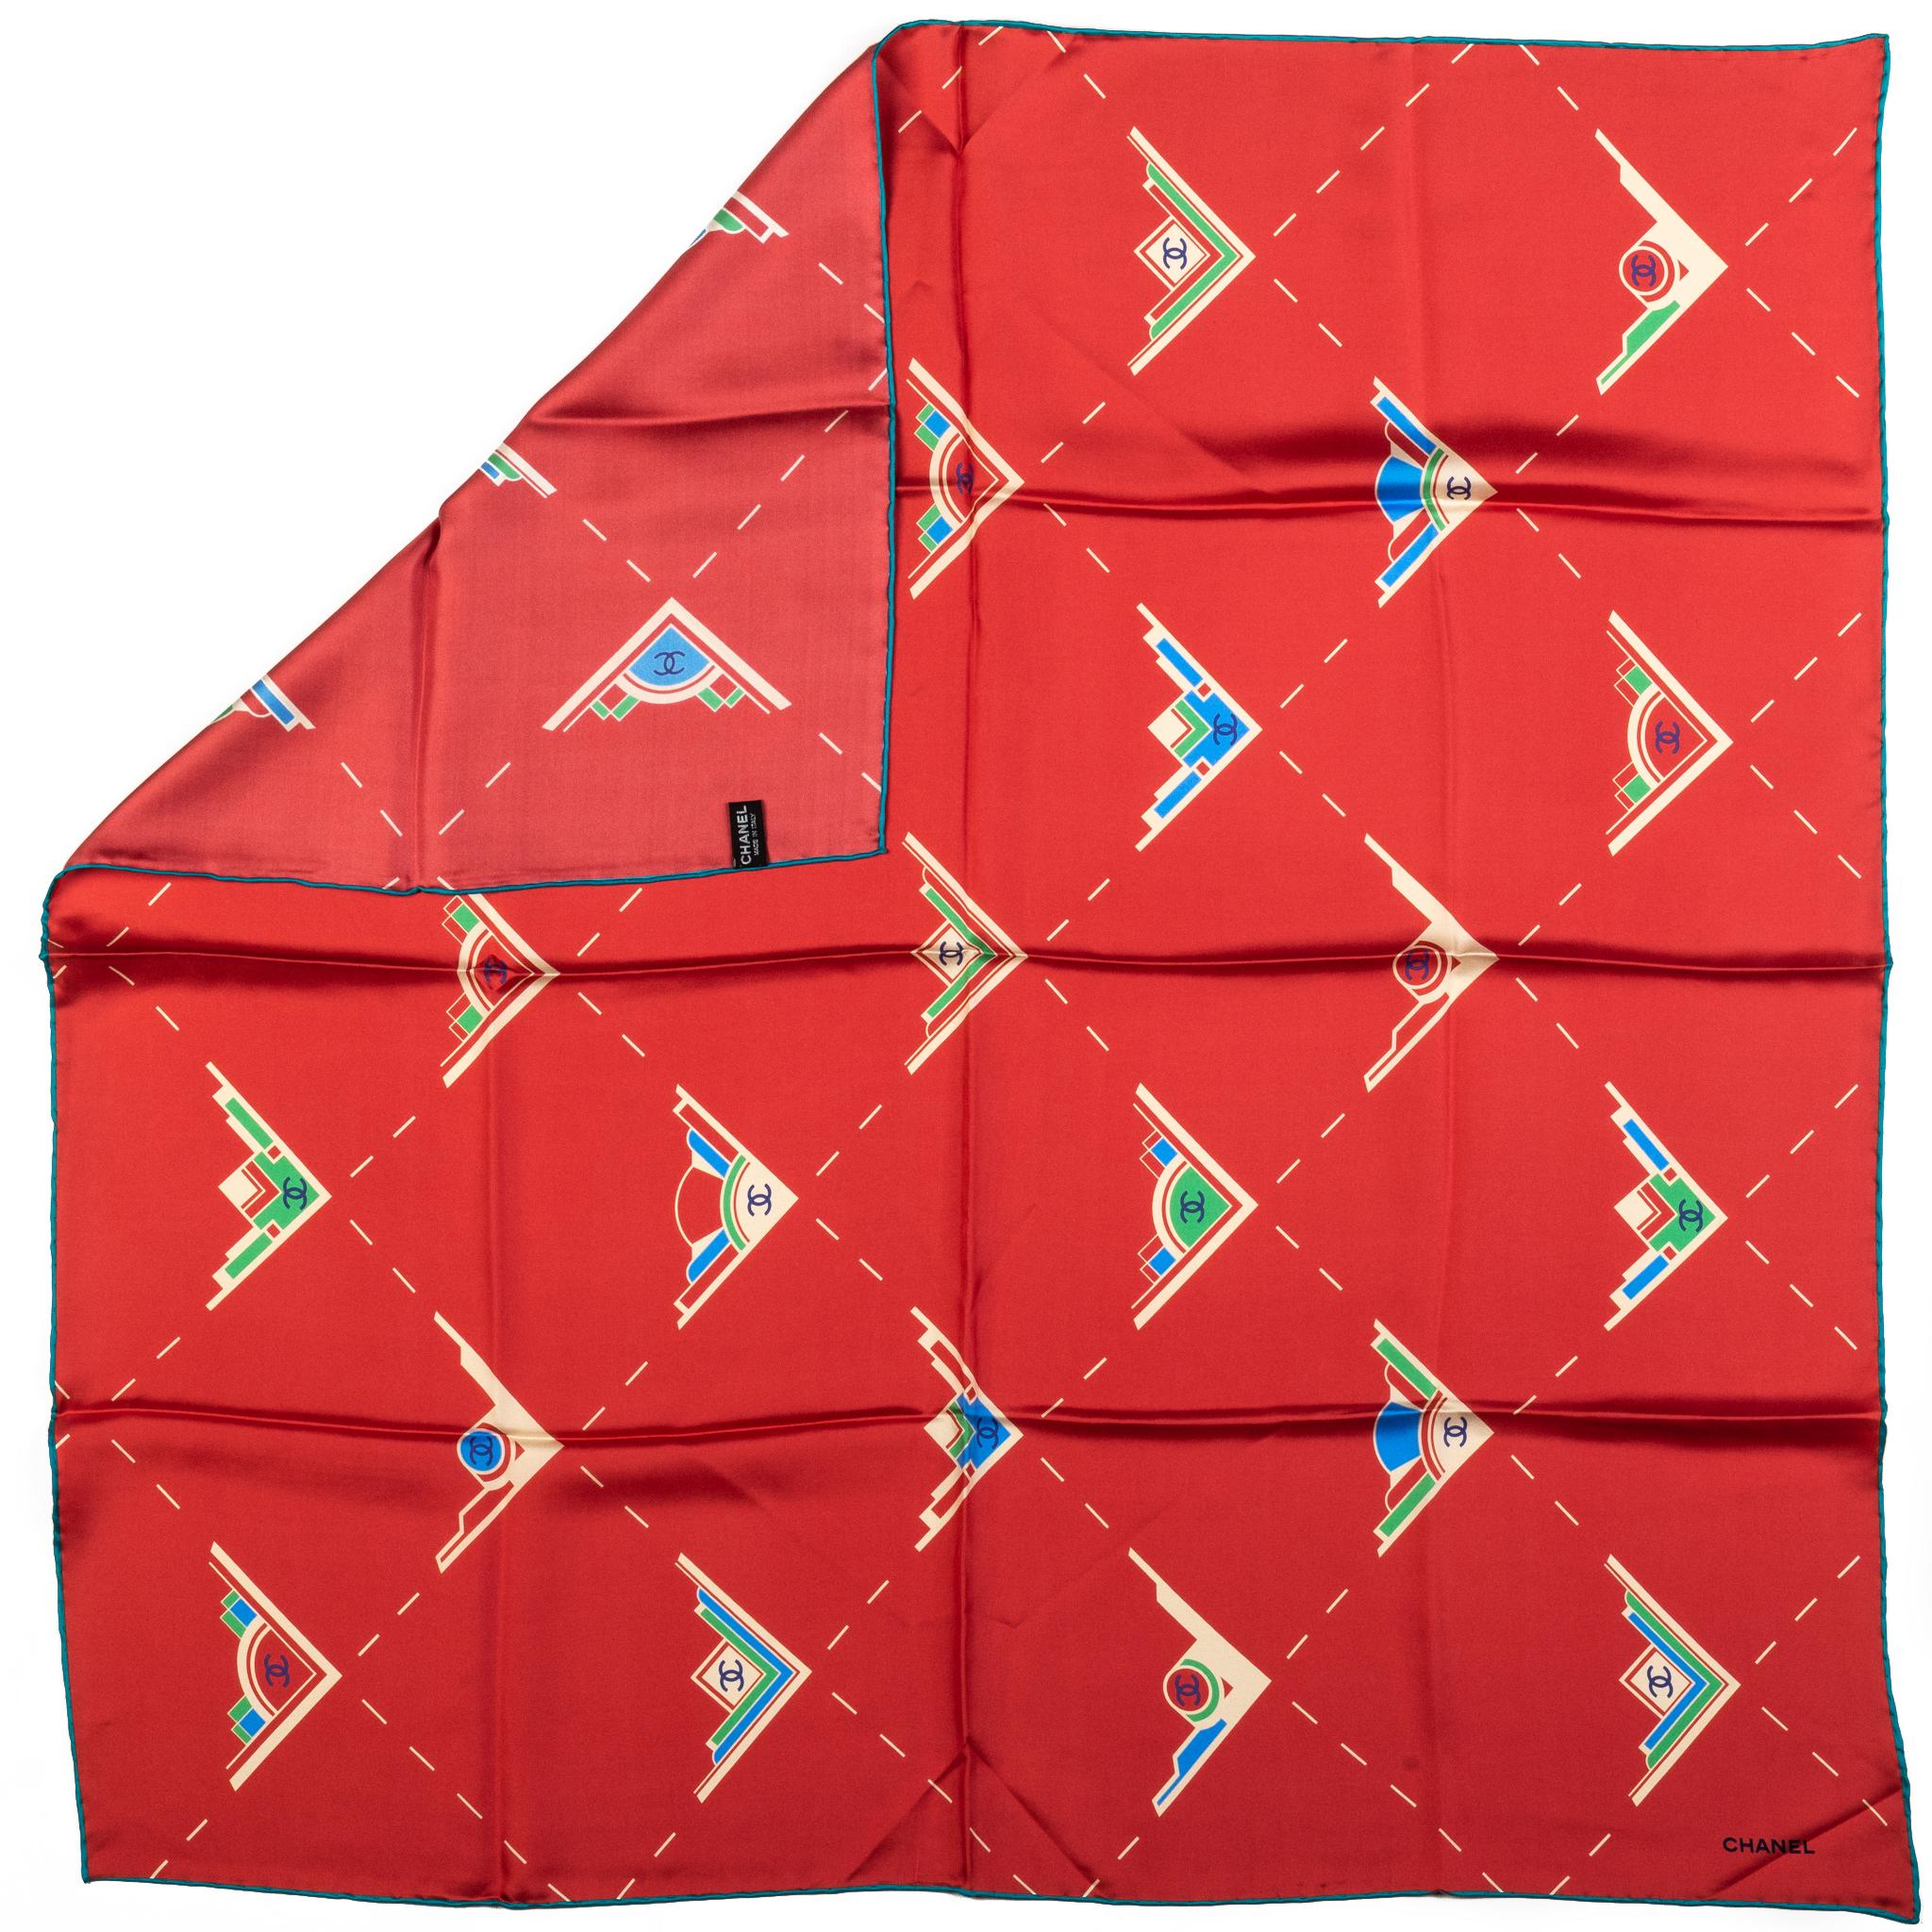 Chanel brand new geometric 100% silk scarf in red and green . Hand rolled edges. Care tag.